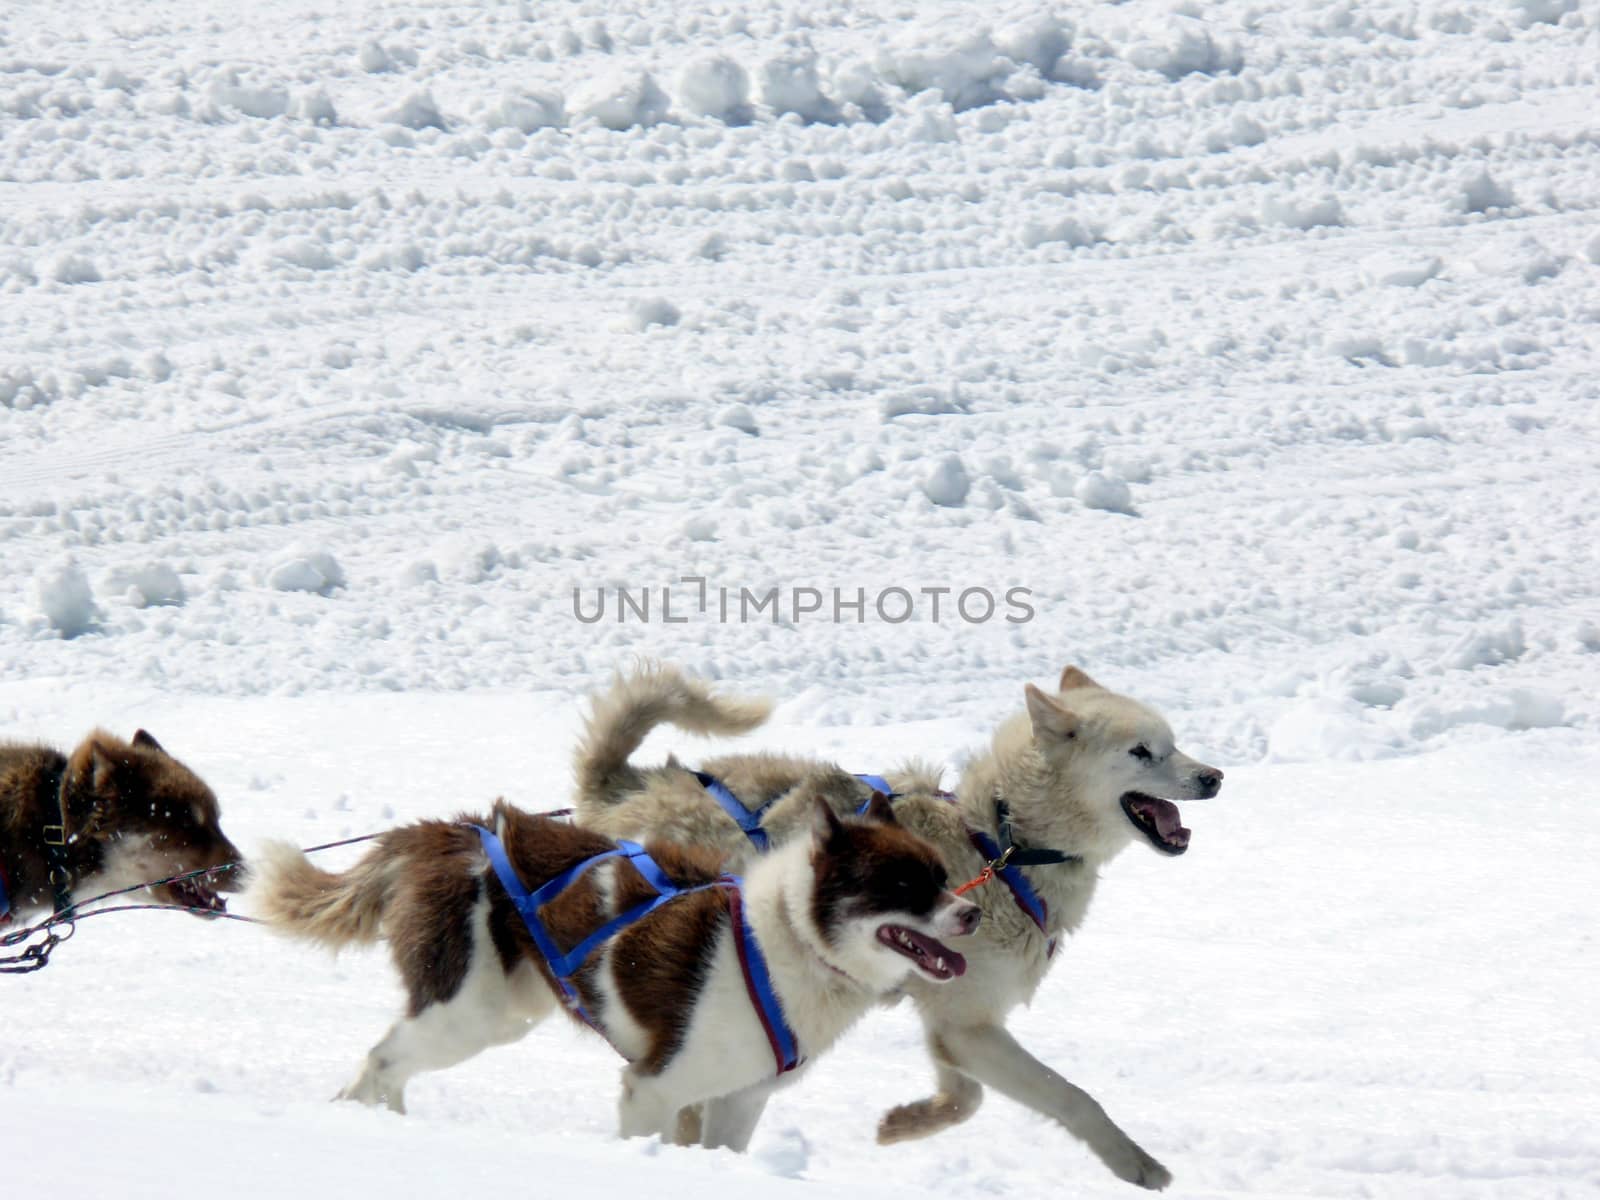 Sled dogs in the snow by Paolo_Grassi